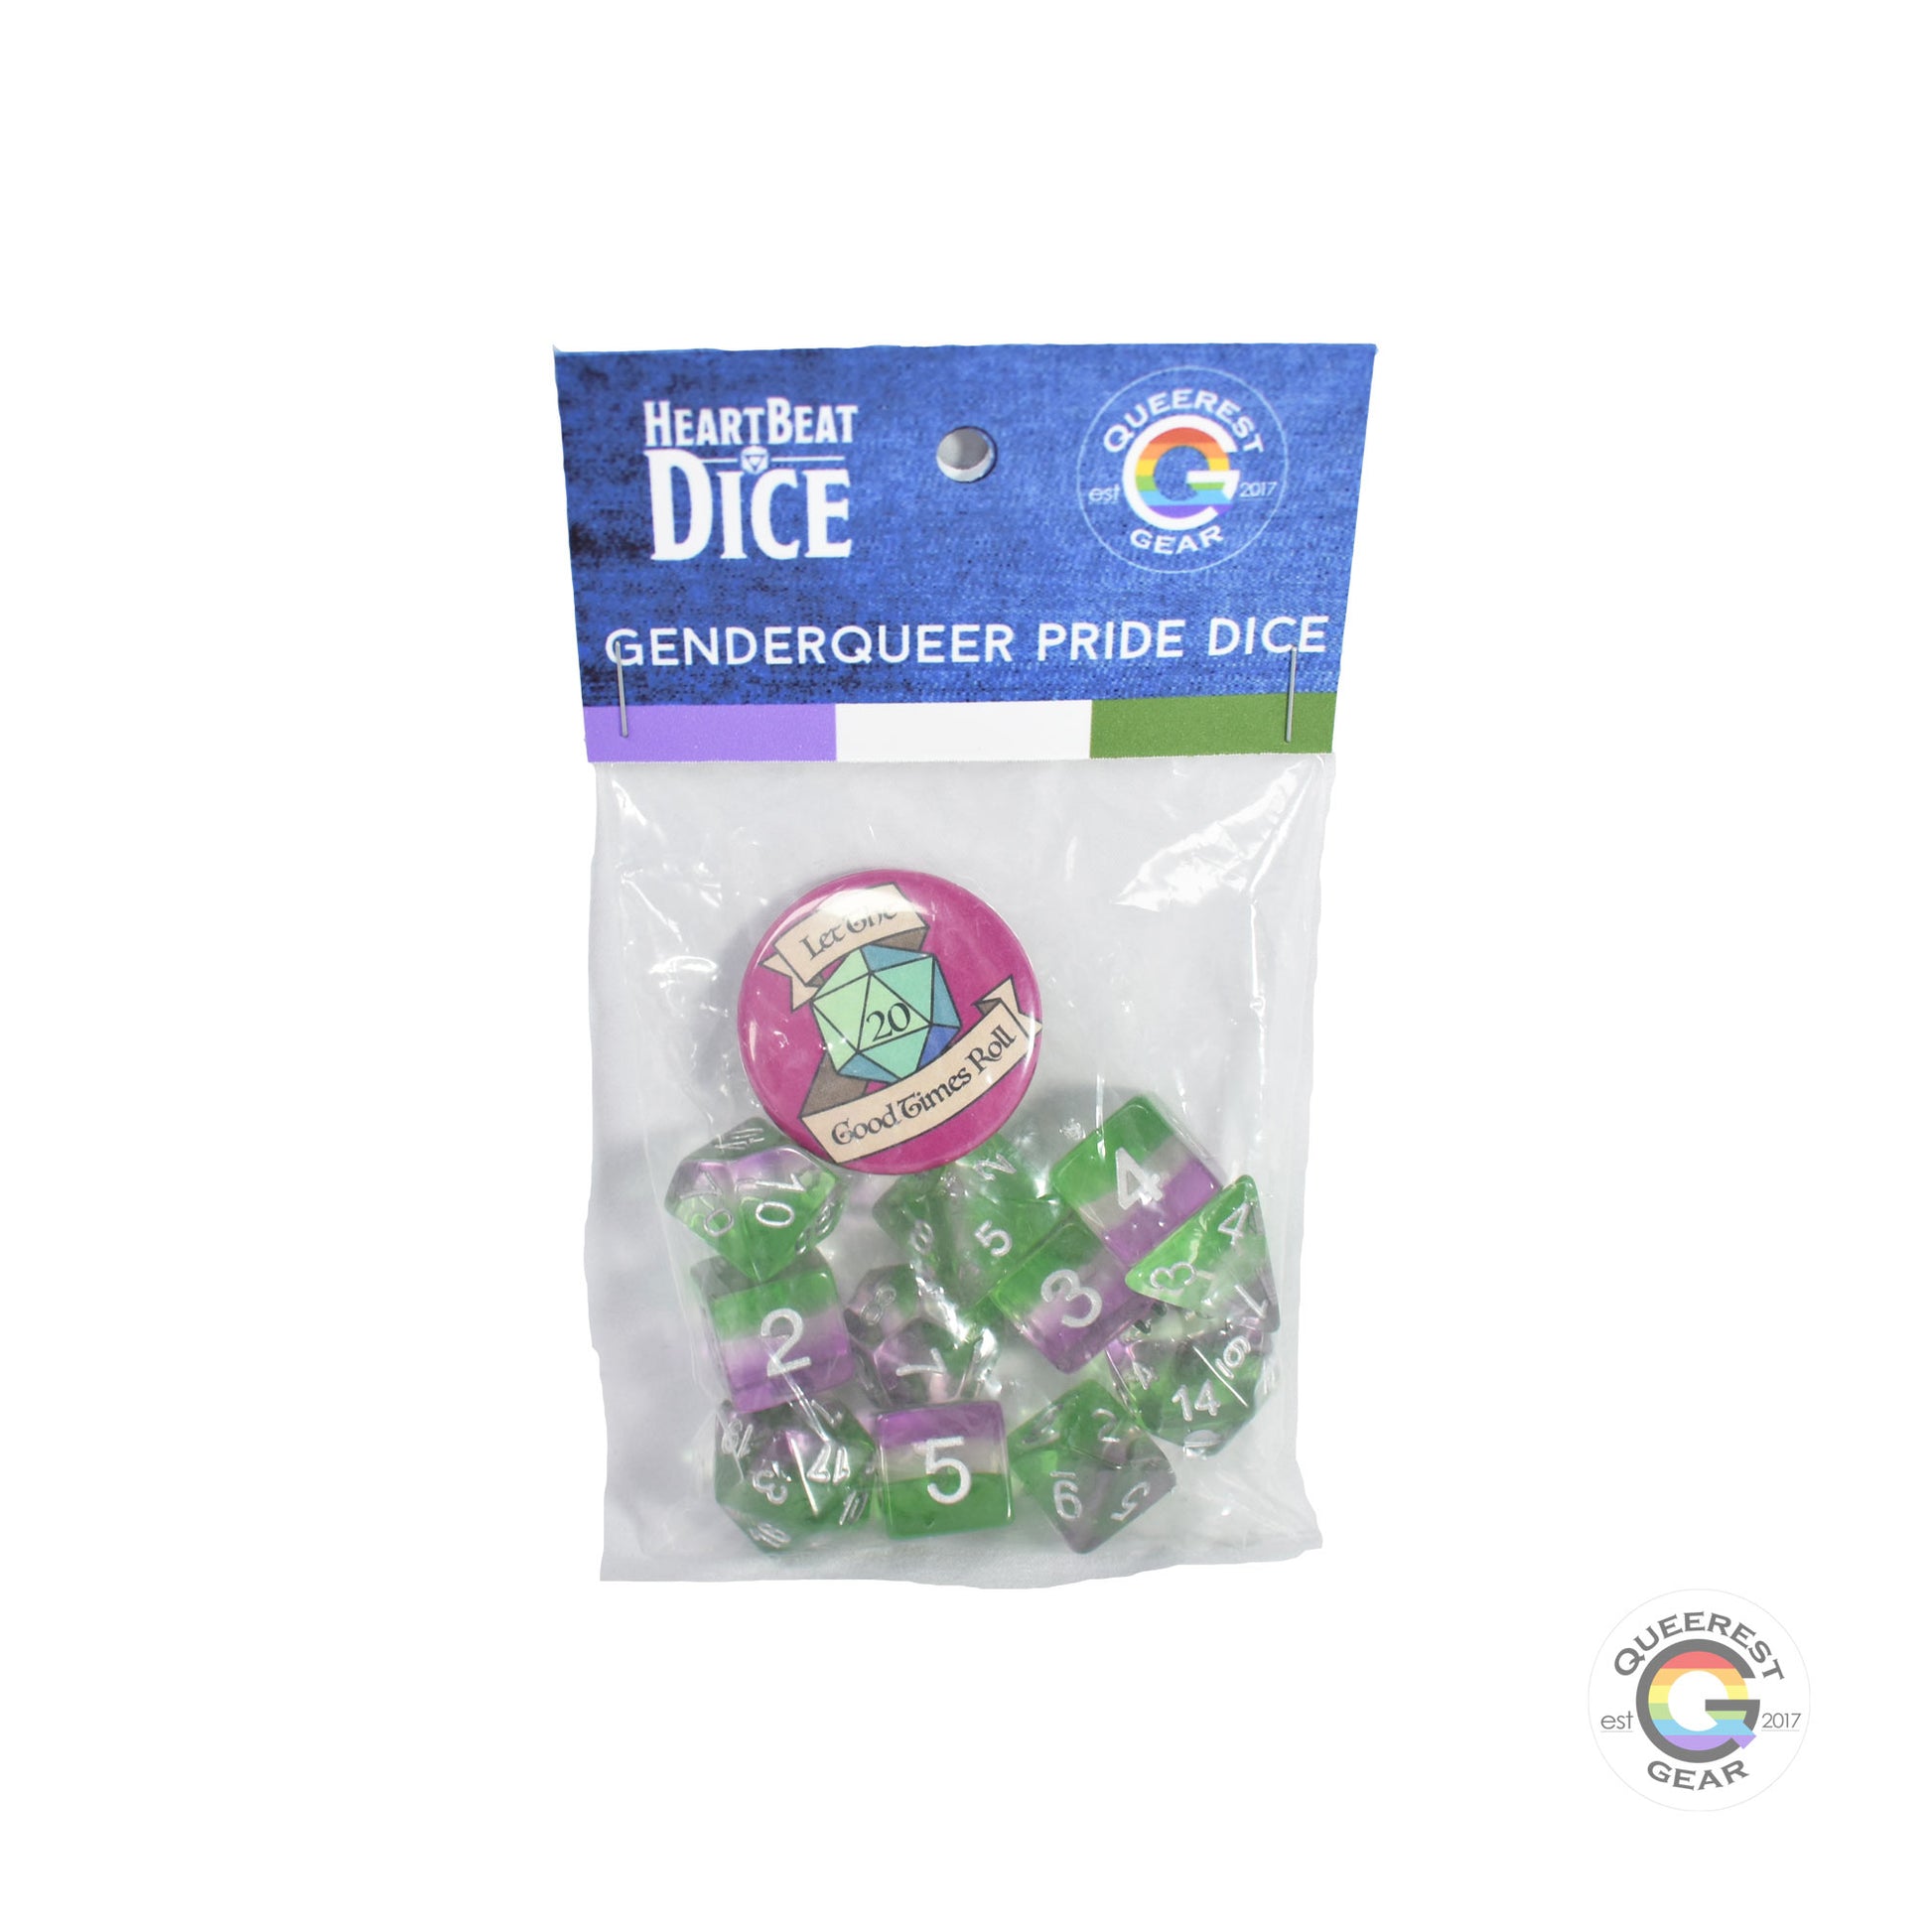 Genderqueer pride dice in their packaging with a free “let the good times roll” button